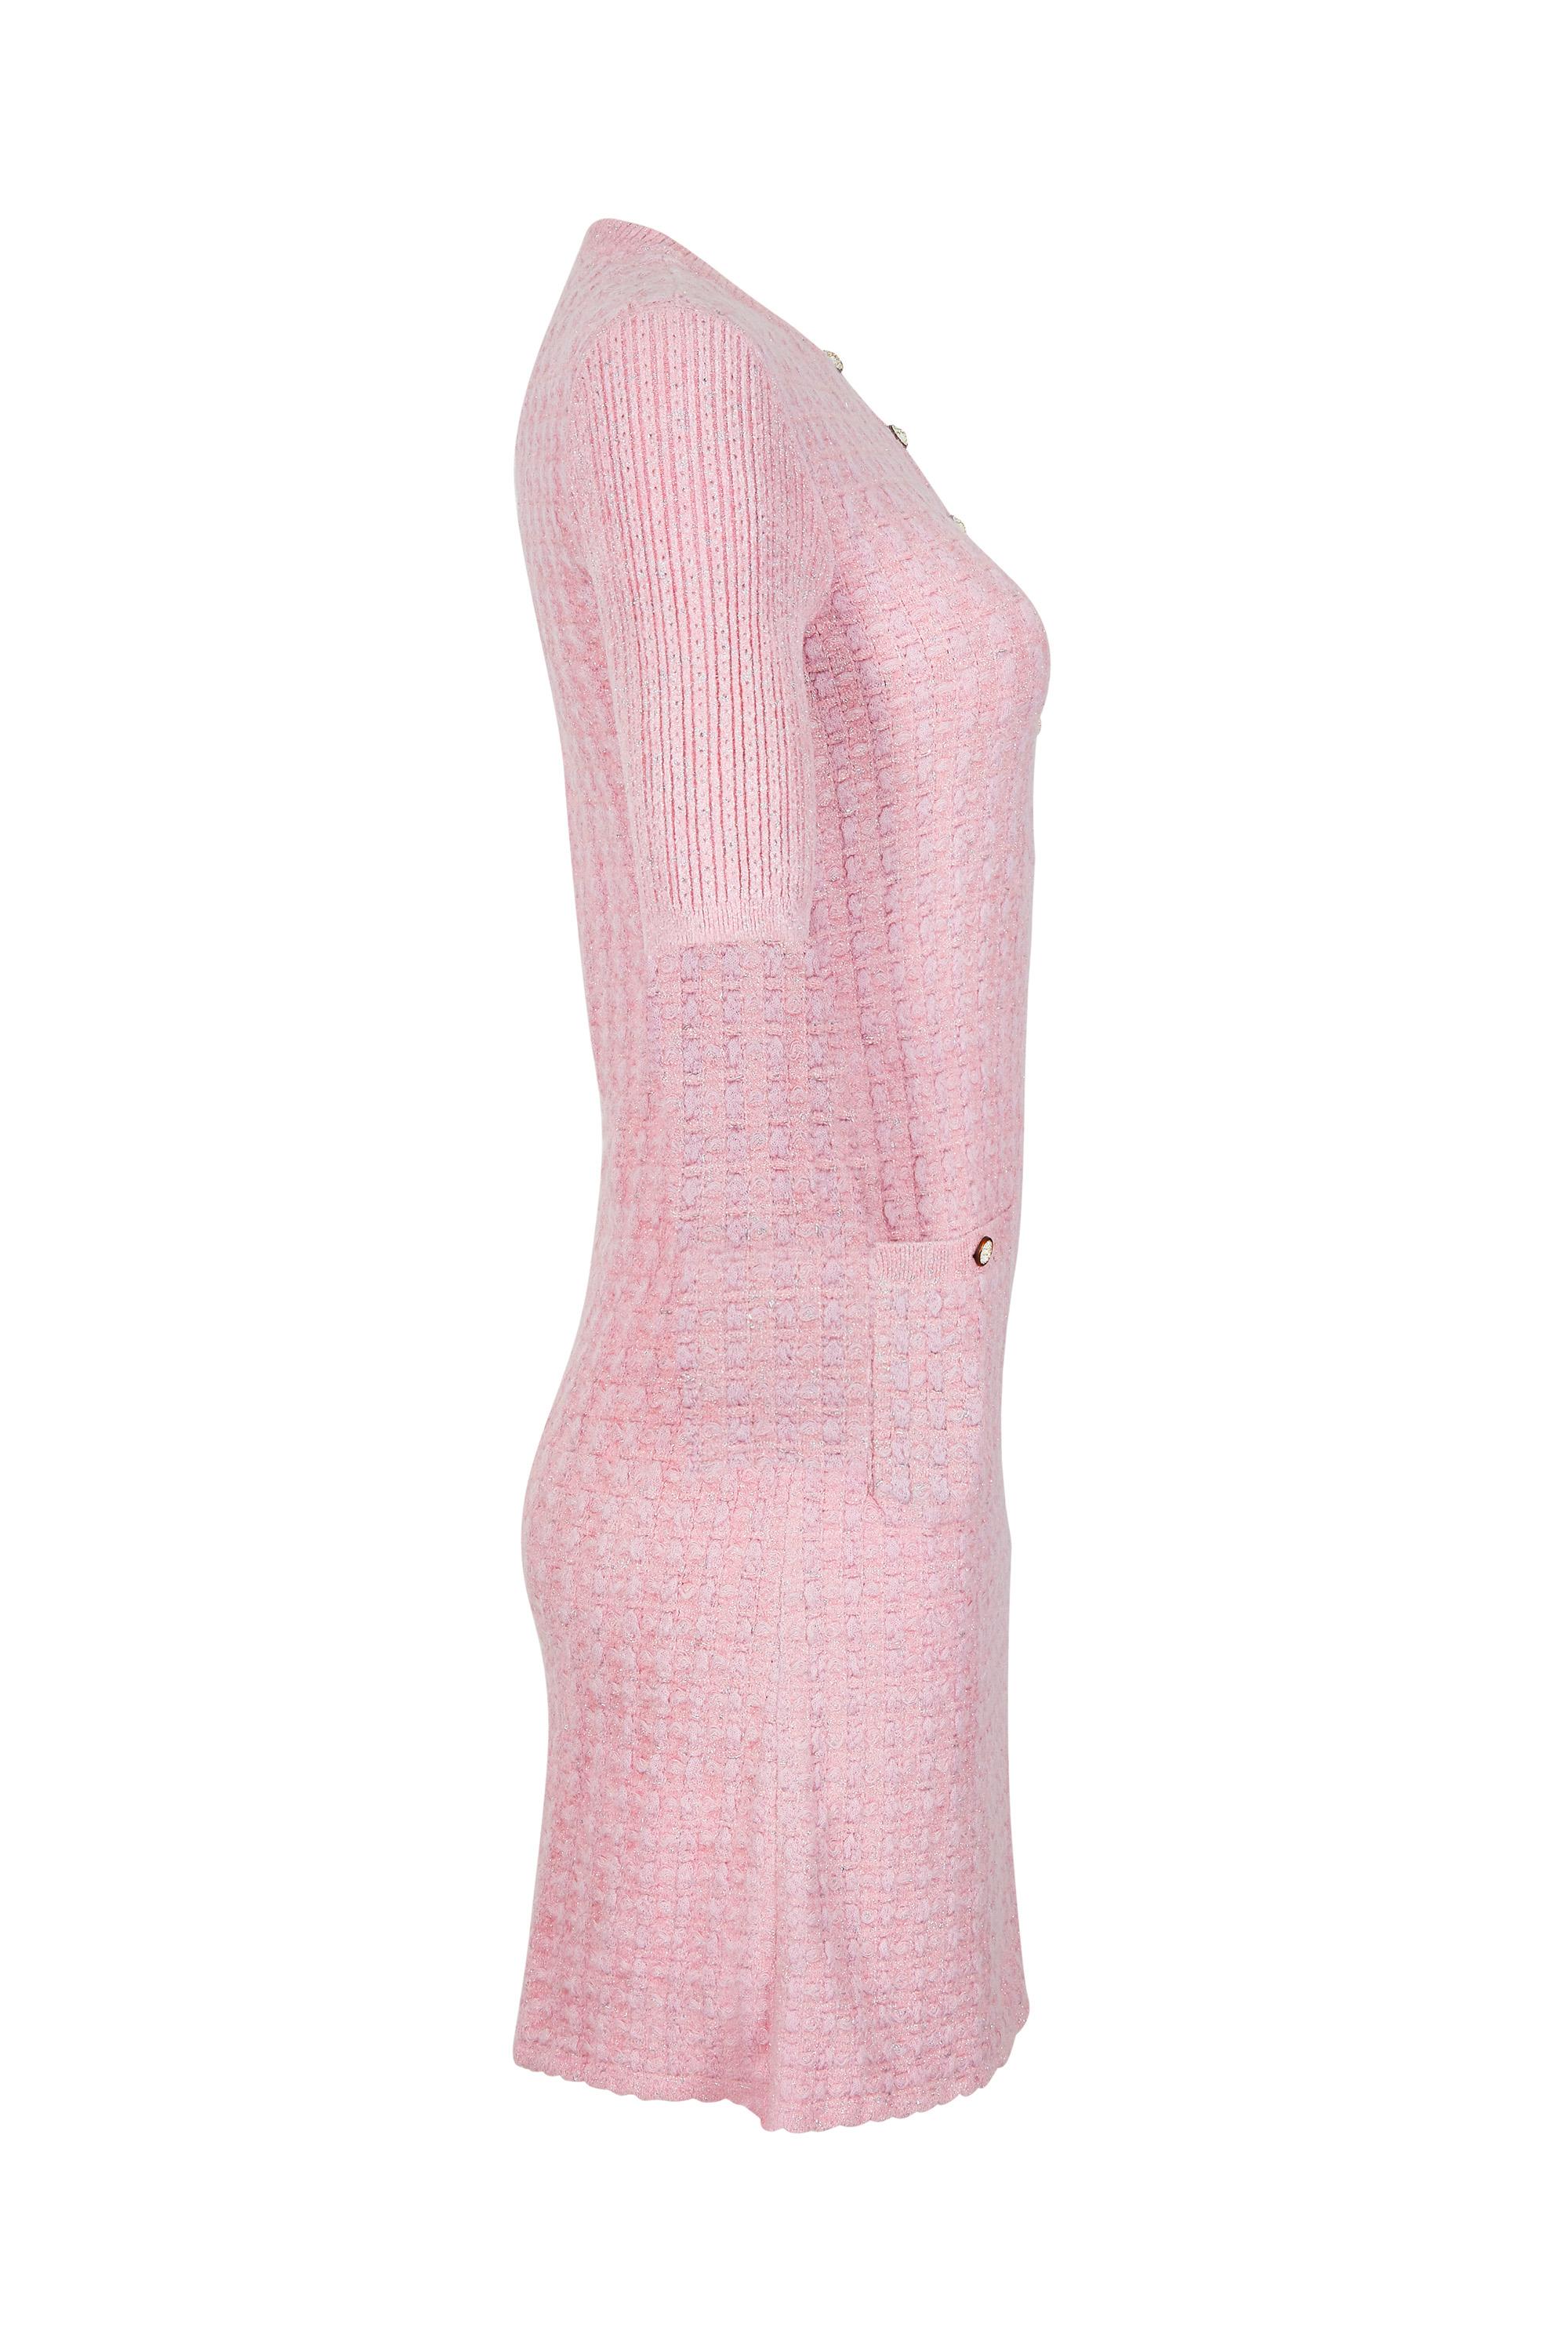 This desirable pale pink and silver knitted dress is a modern classic from Chanel and is chic, versatile and in beautiful condition. Comprised of soft mohair blend yarn subtly interspersed with silver lamé thread, it is woven to emulate the